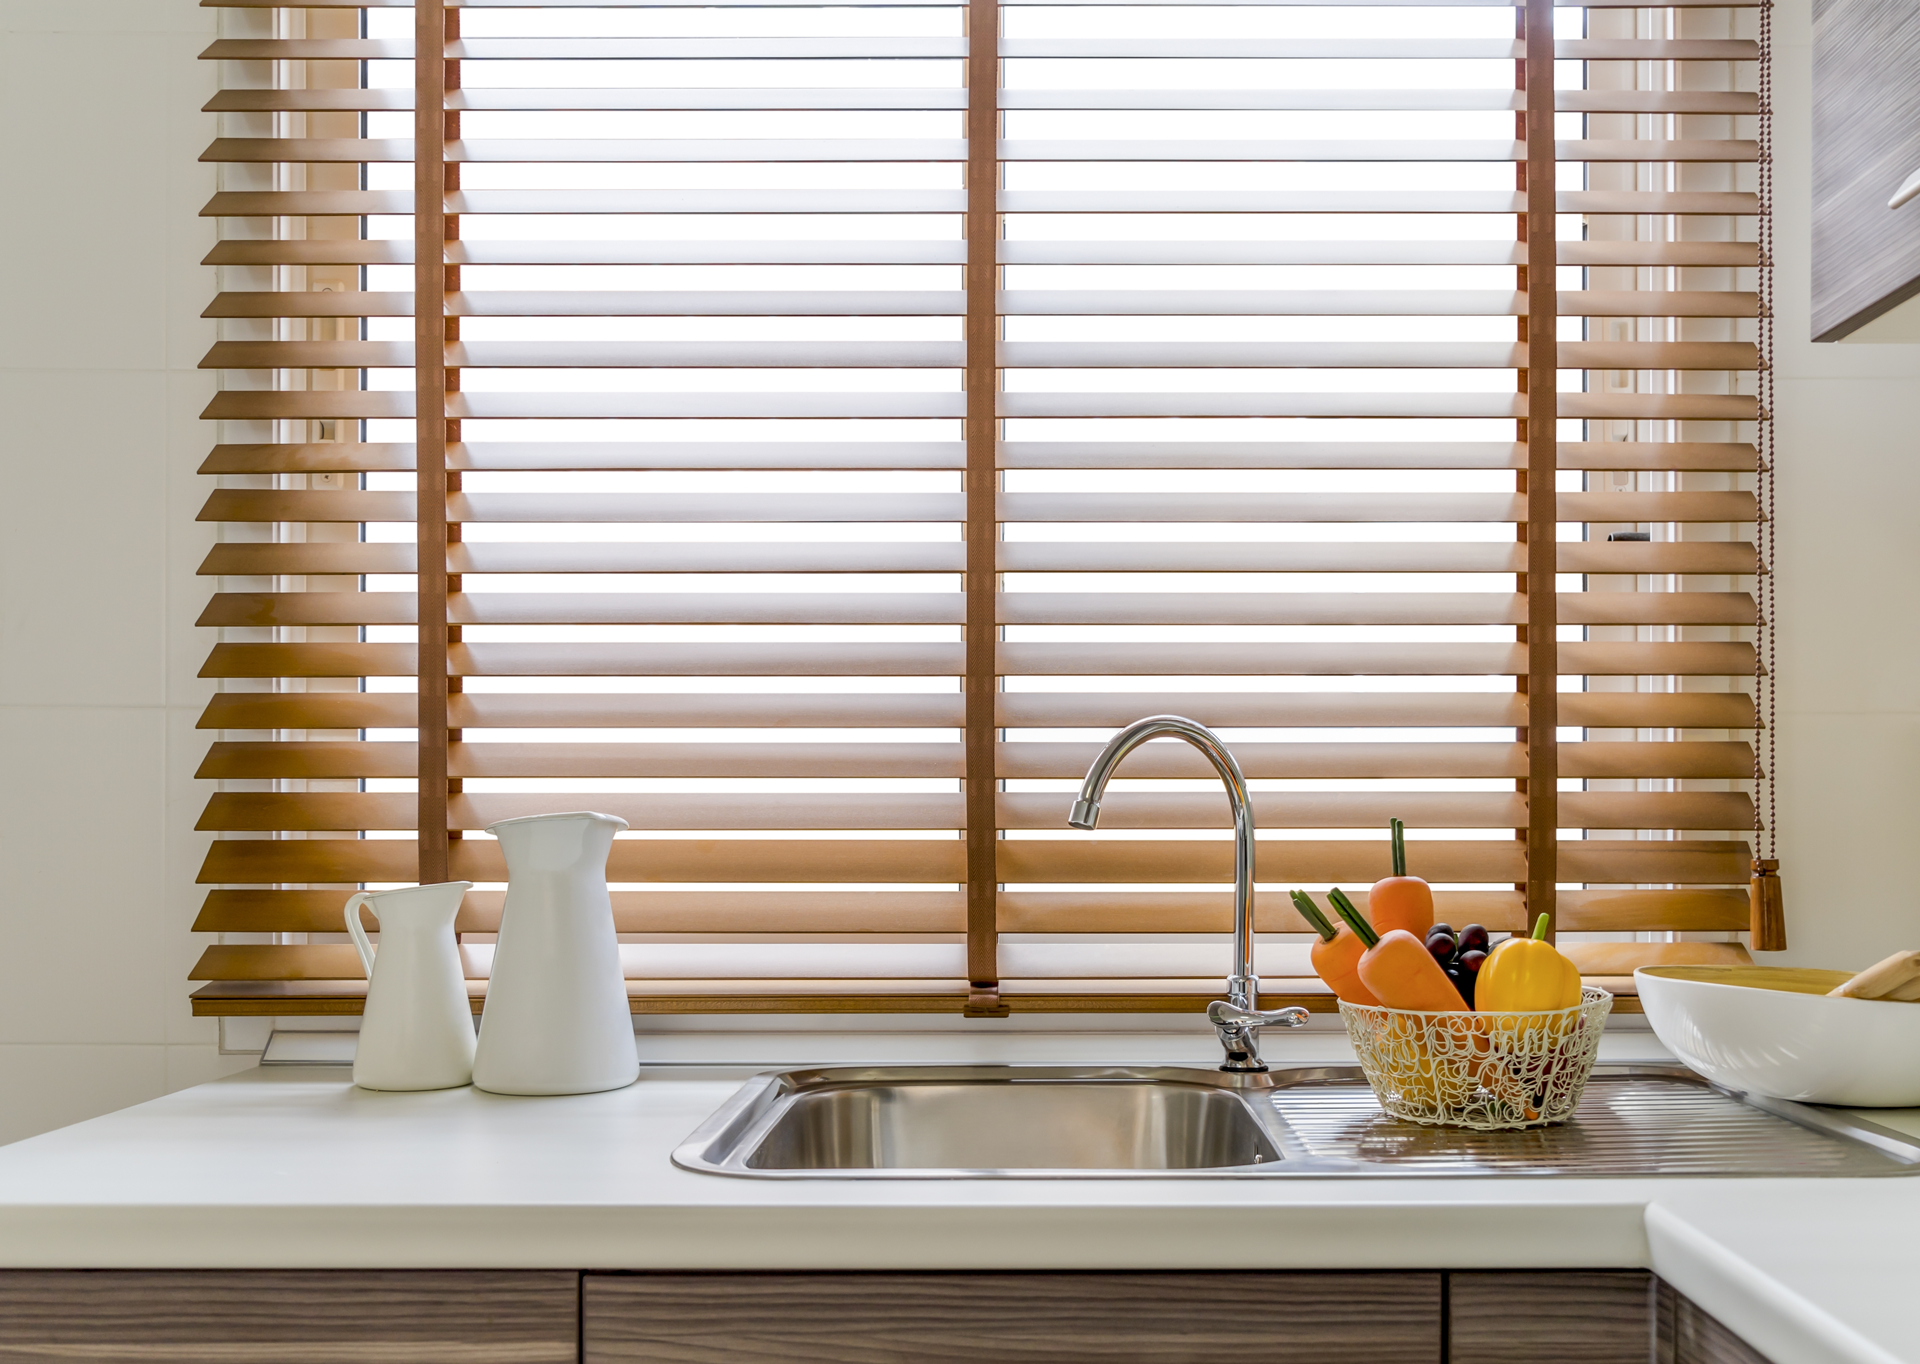 A kitchen with a sink and wooden blinds on the window